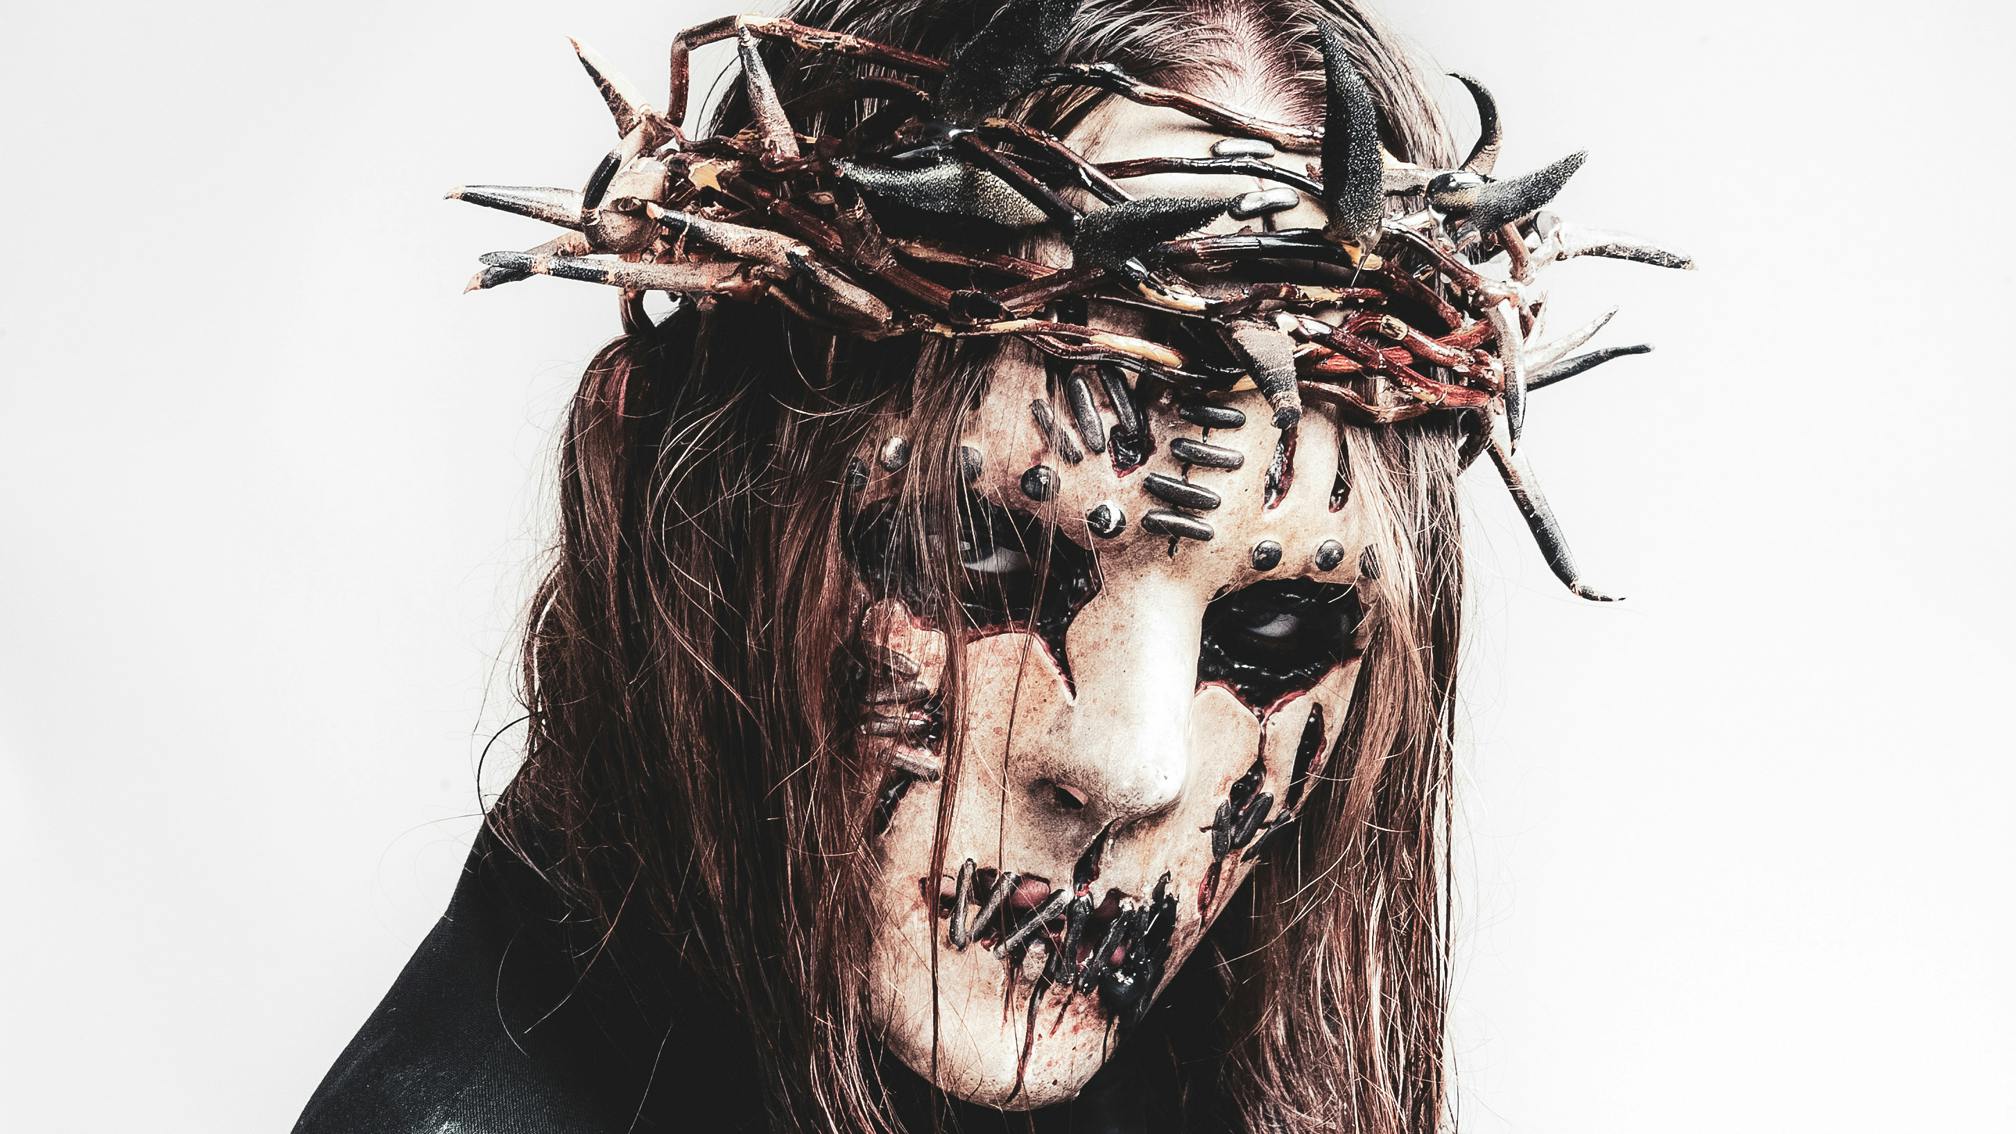 Why meeting Joey Jordison meant the world to me